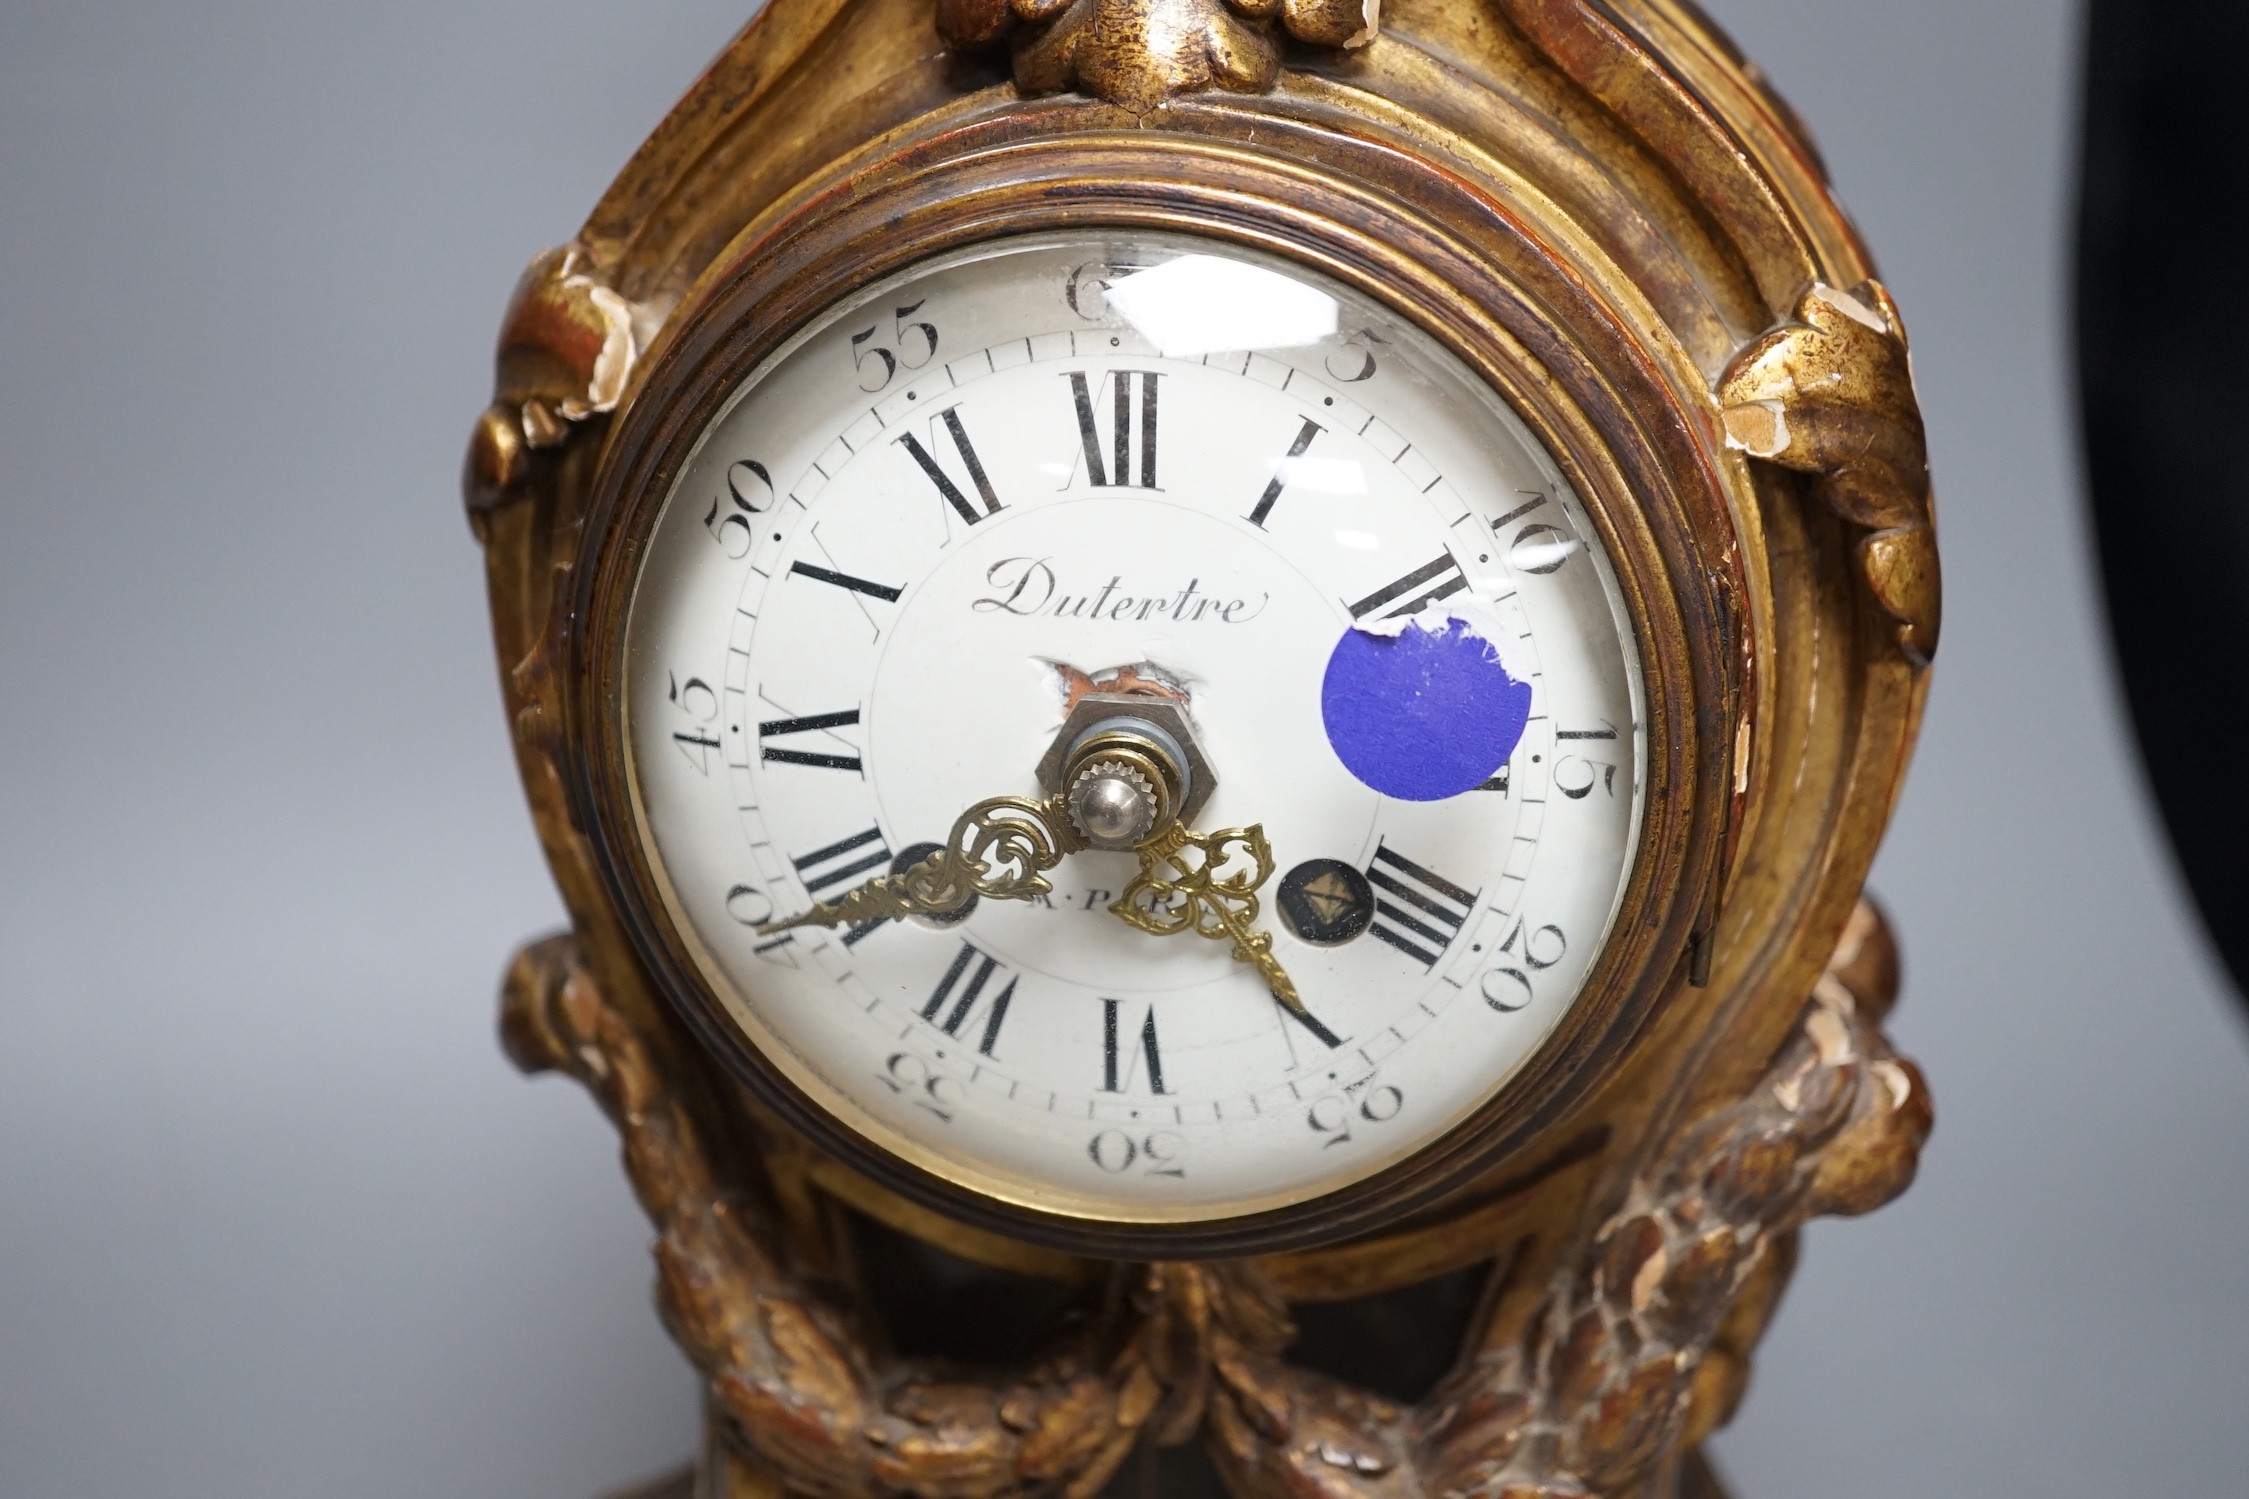 A 19th century French giltwood mantel timepiece with later electric movement, 39cm